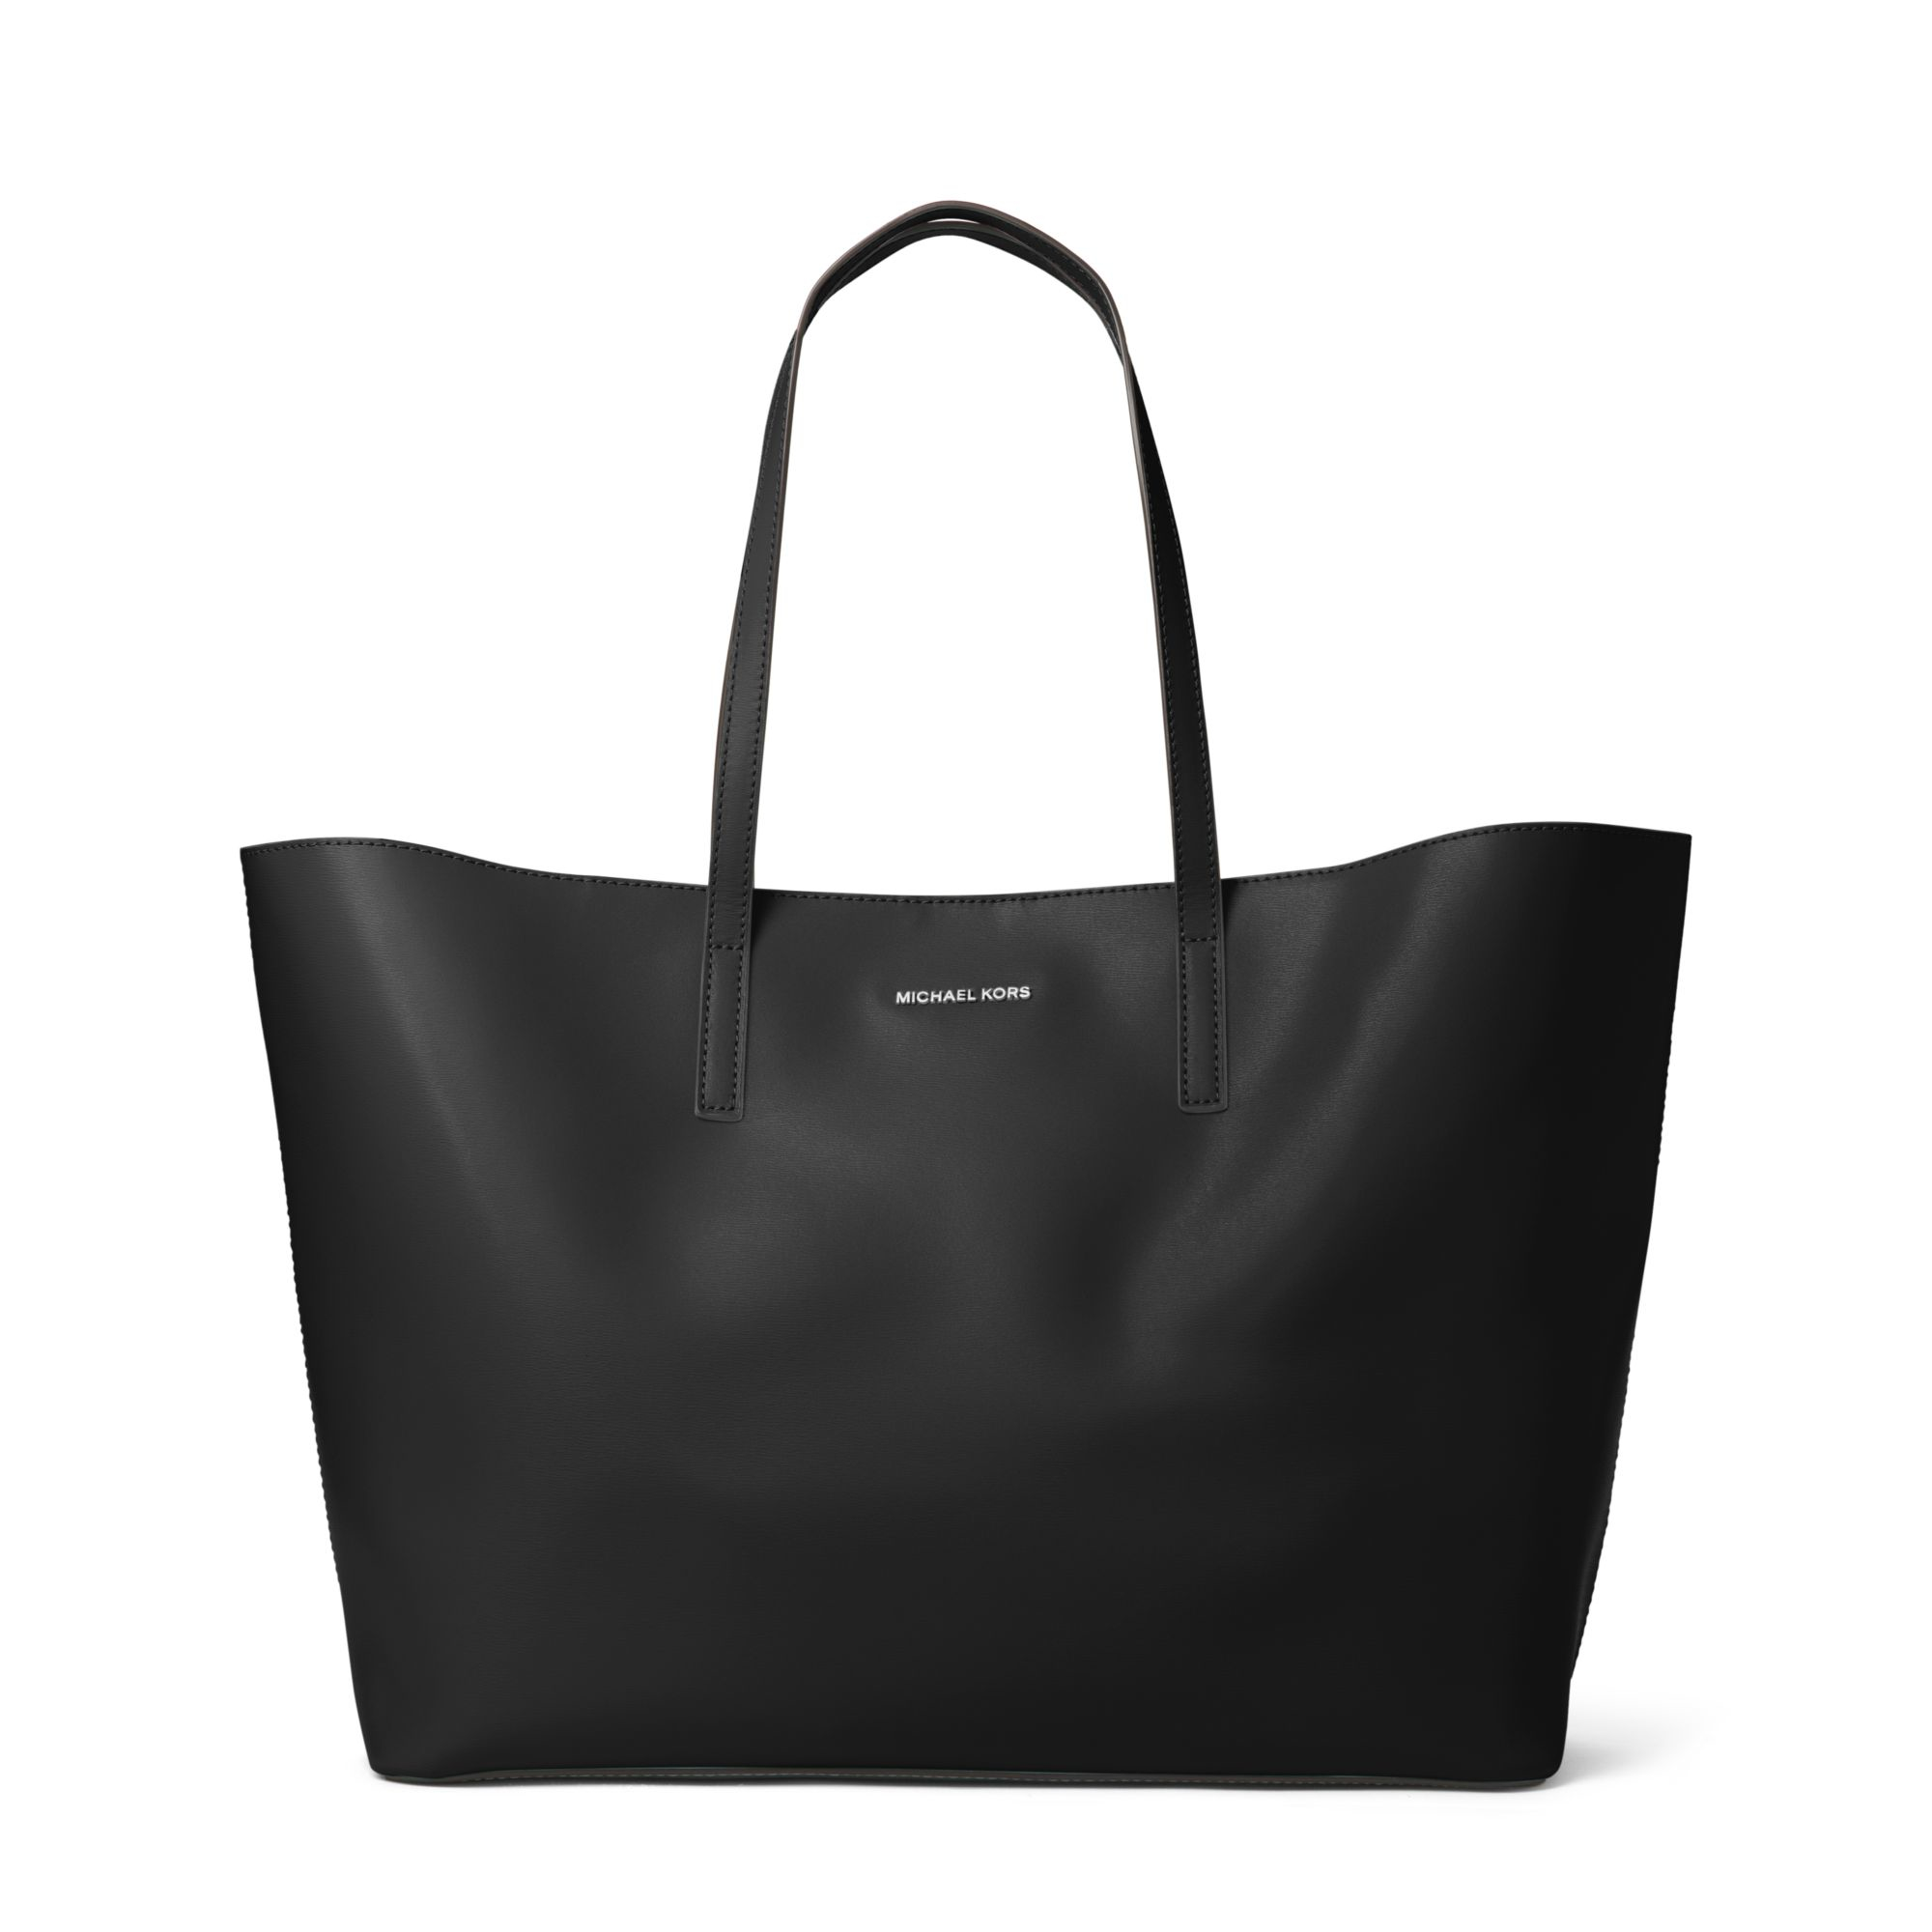 Lyst - Michael Kors Emry Extra-Large Leather Tote in Black